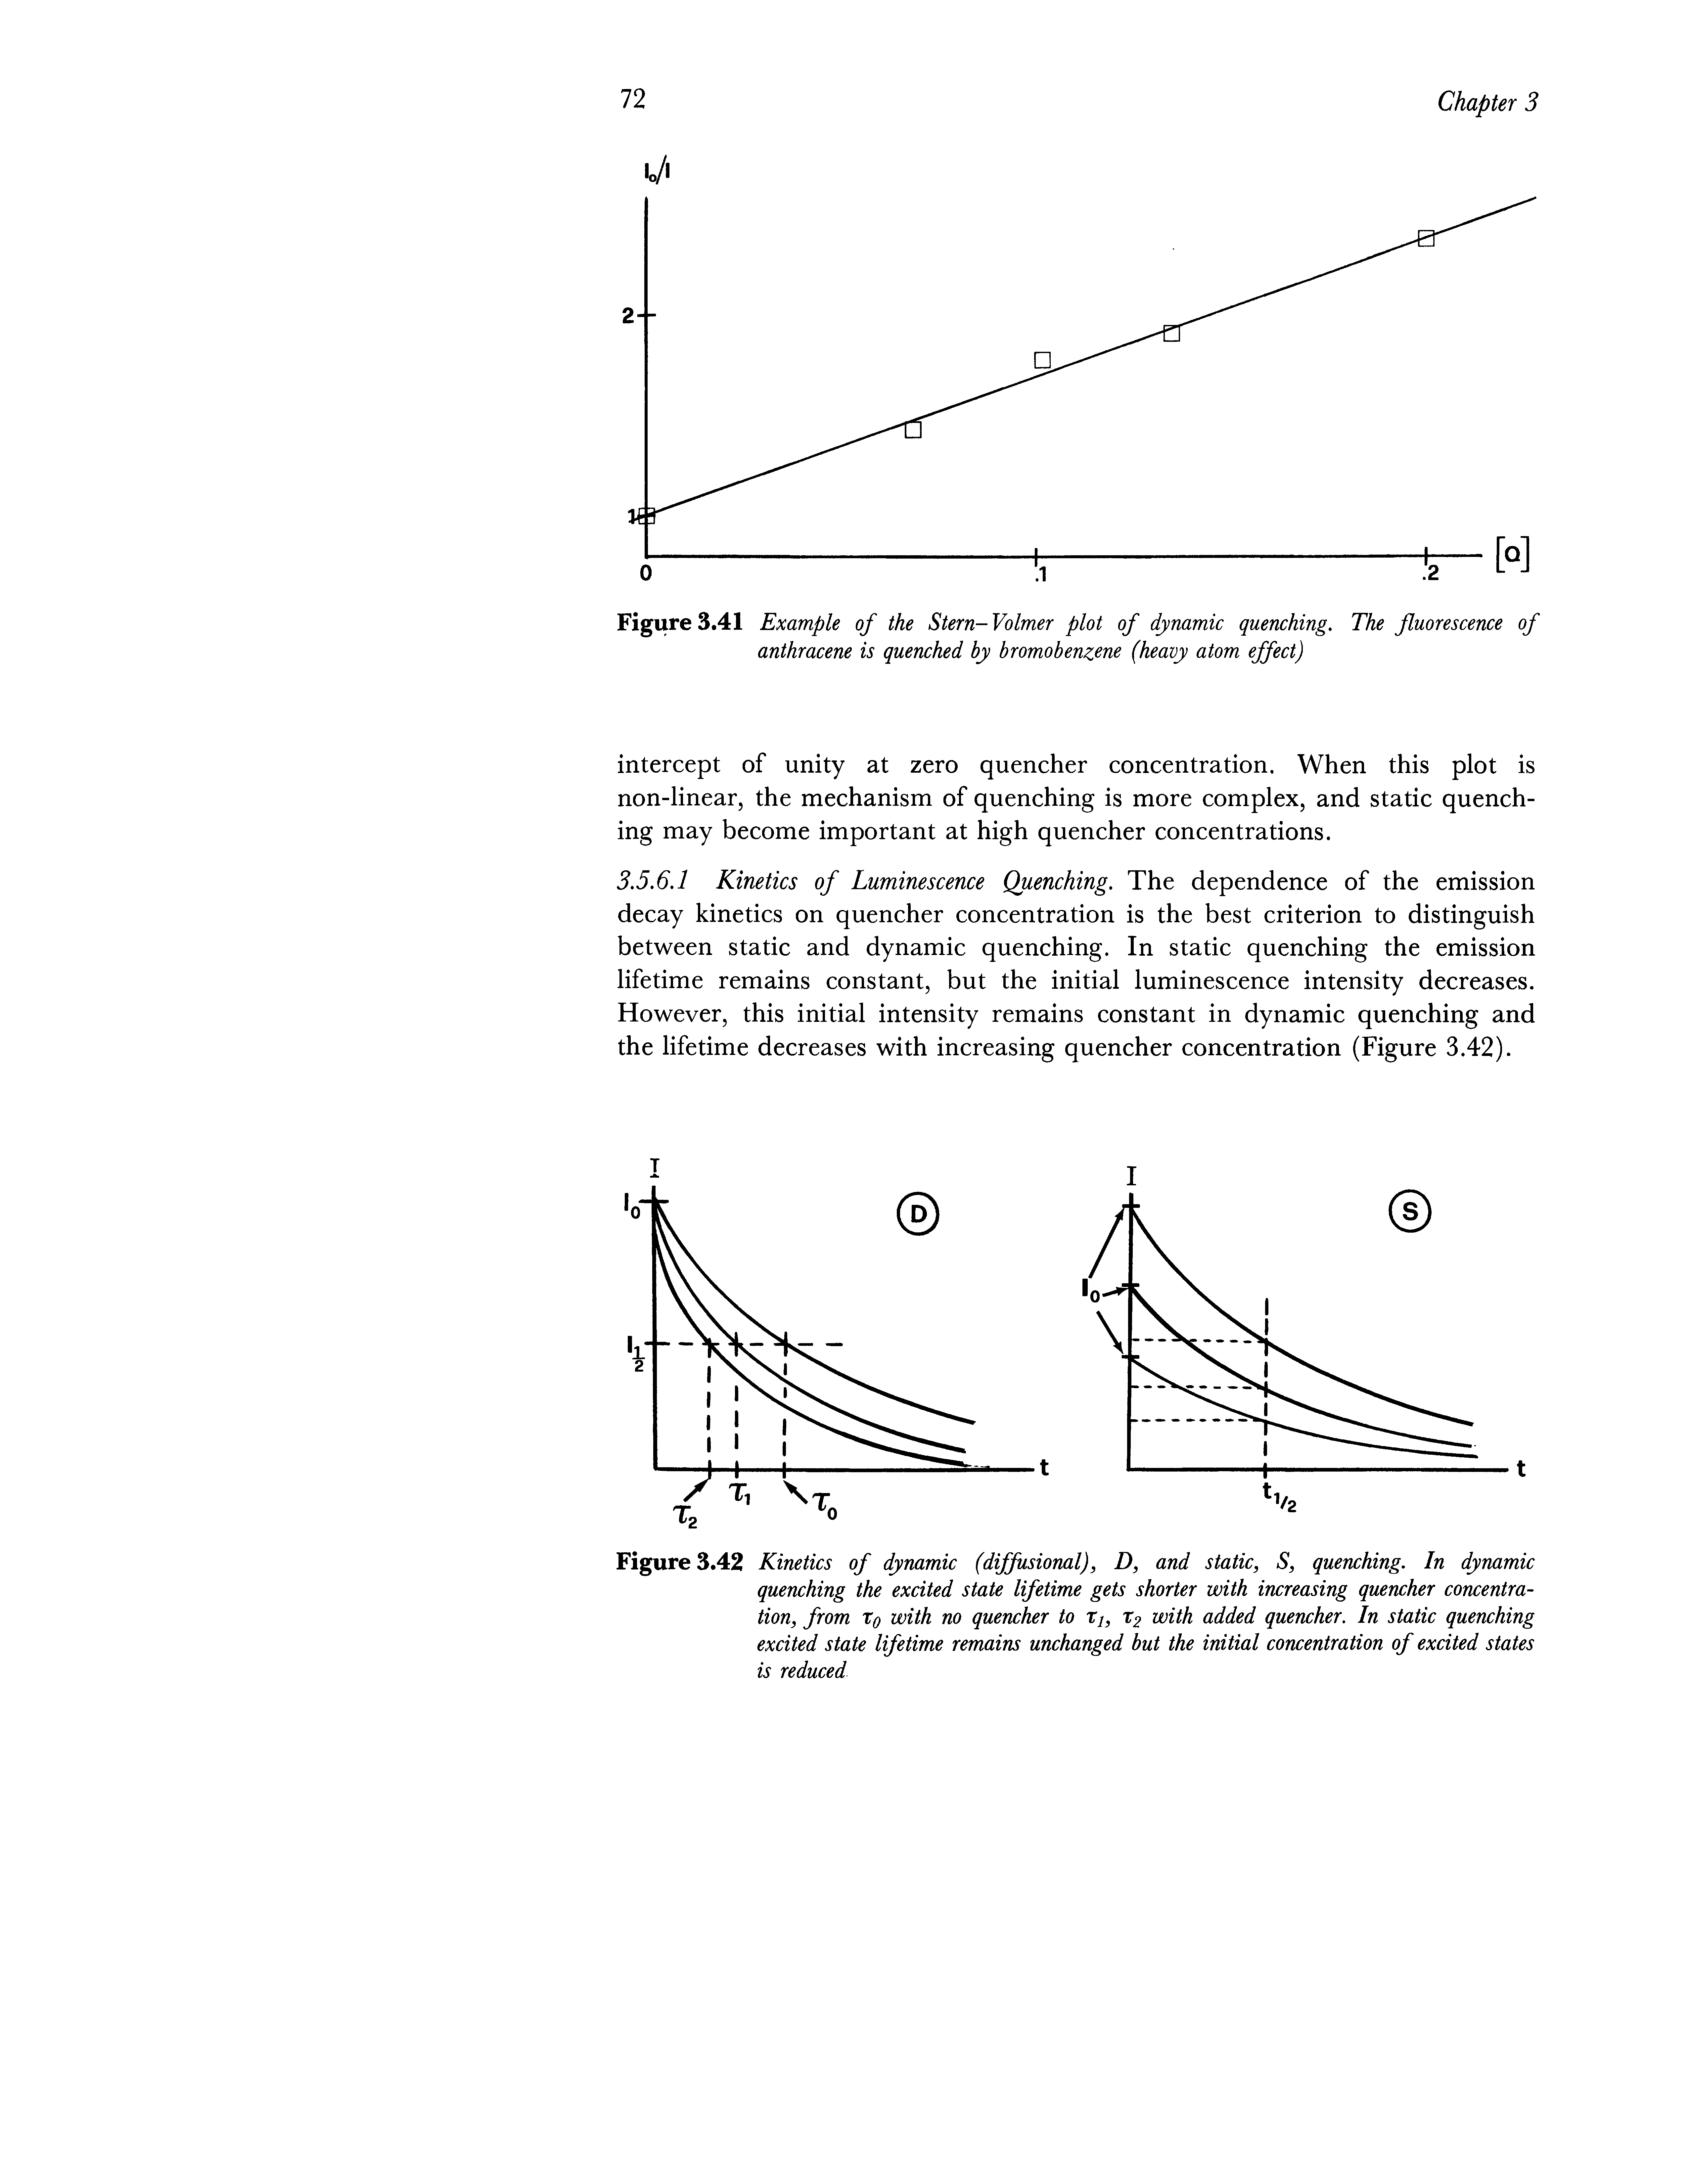 Figure 3.42 Kinetics of dynamic (diffusional), D, and static, S, quenching. In dynamic quenching the excited state lifetime gets shorter with increasing quencher concentration, from to with no quencher to t1 t2 with added quencher. In static quenching excited state lifetime remains unchanged but the initial concentration of excited states is reduced...